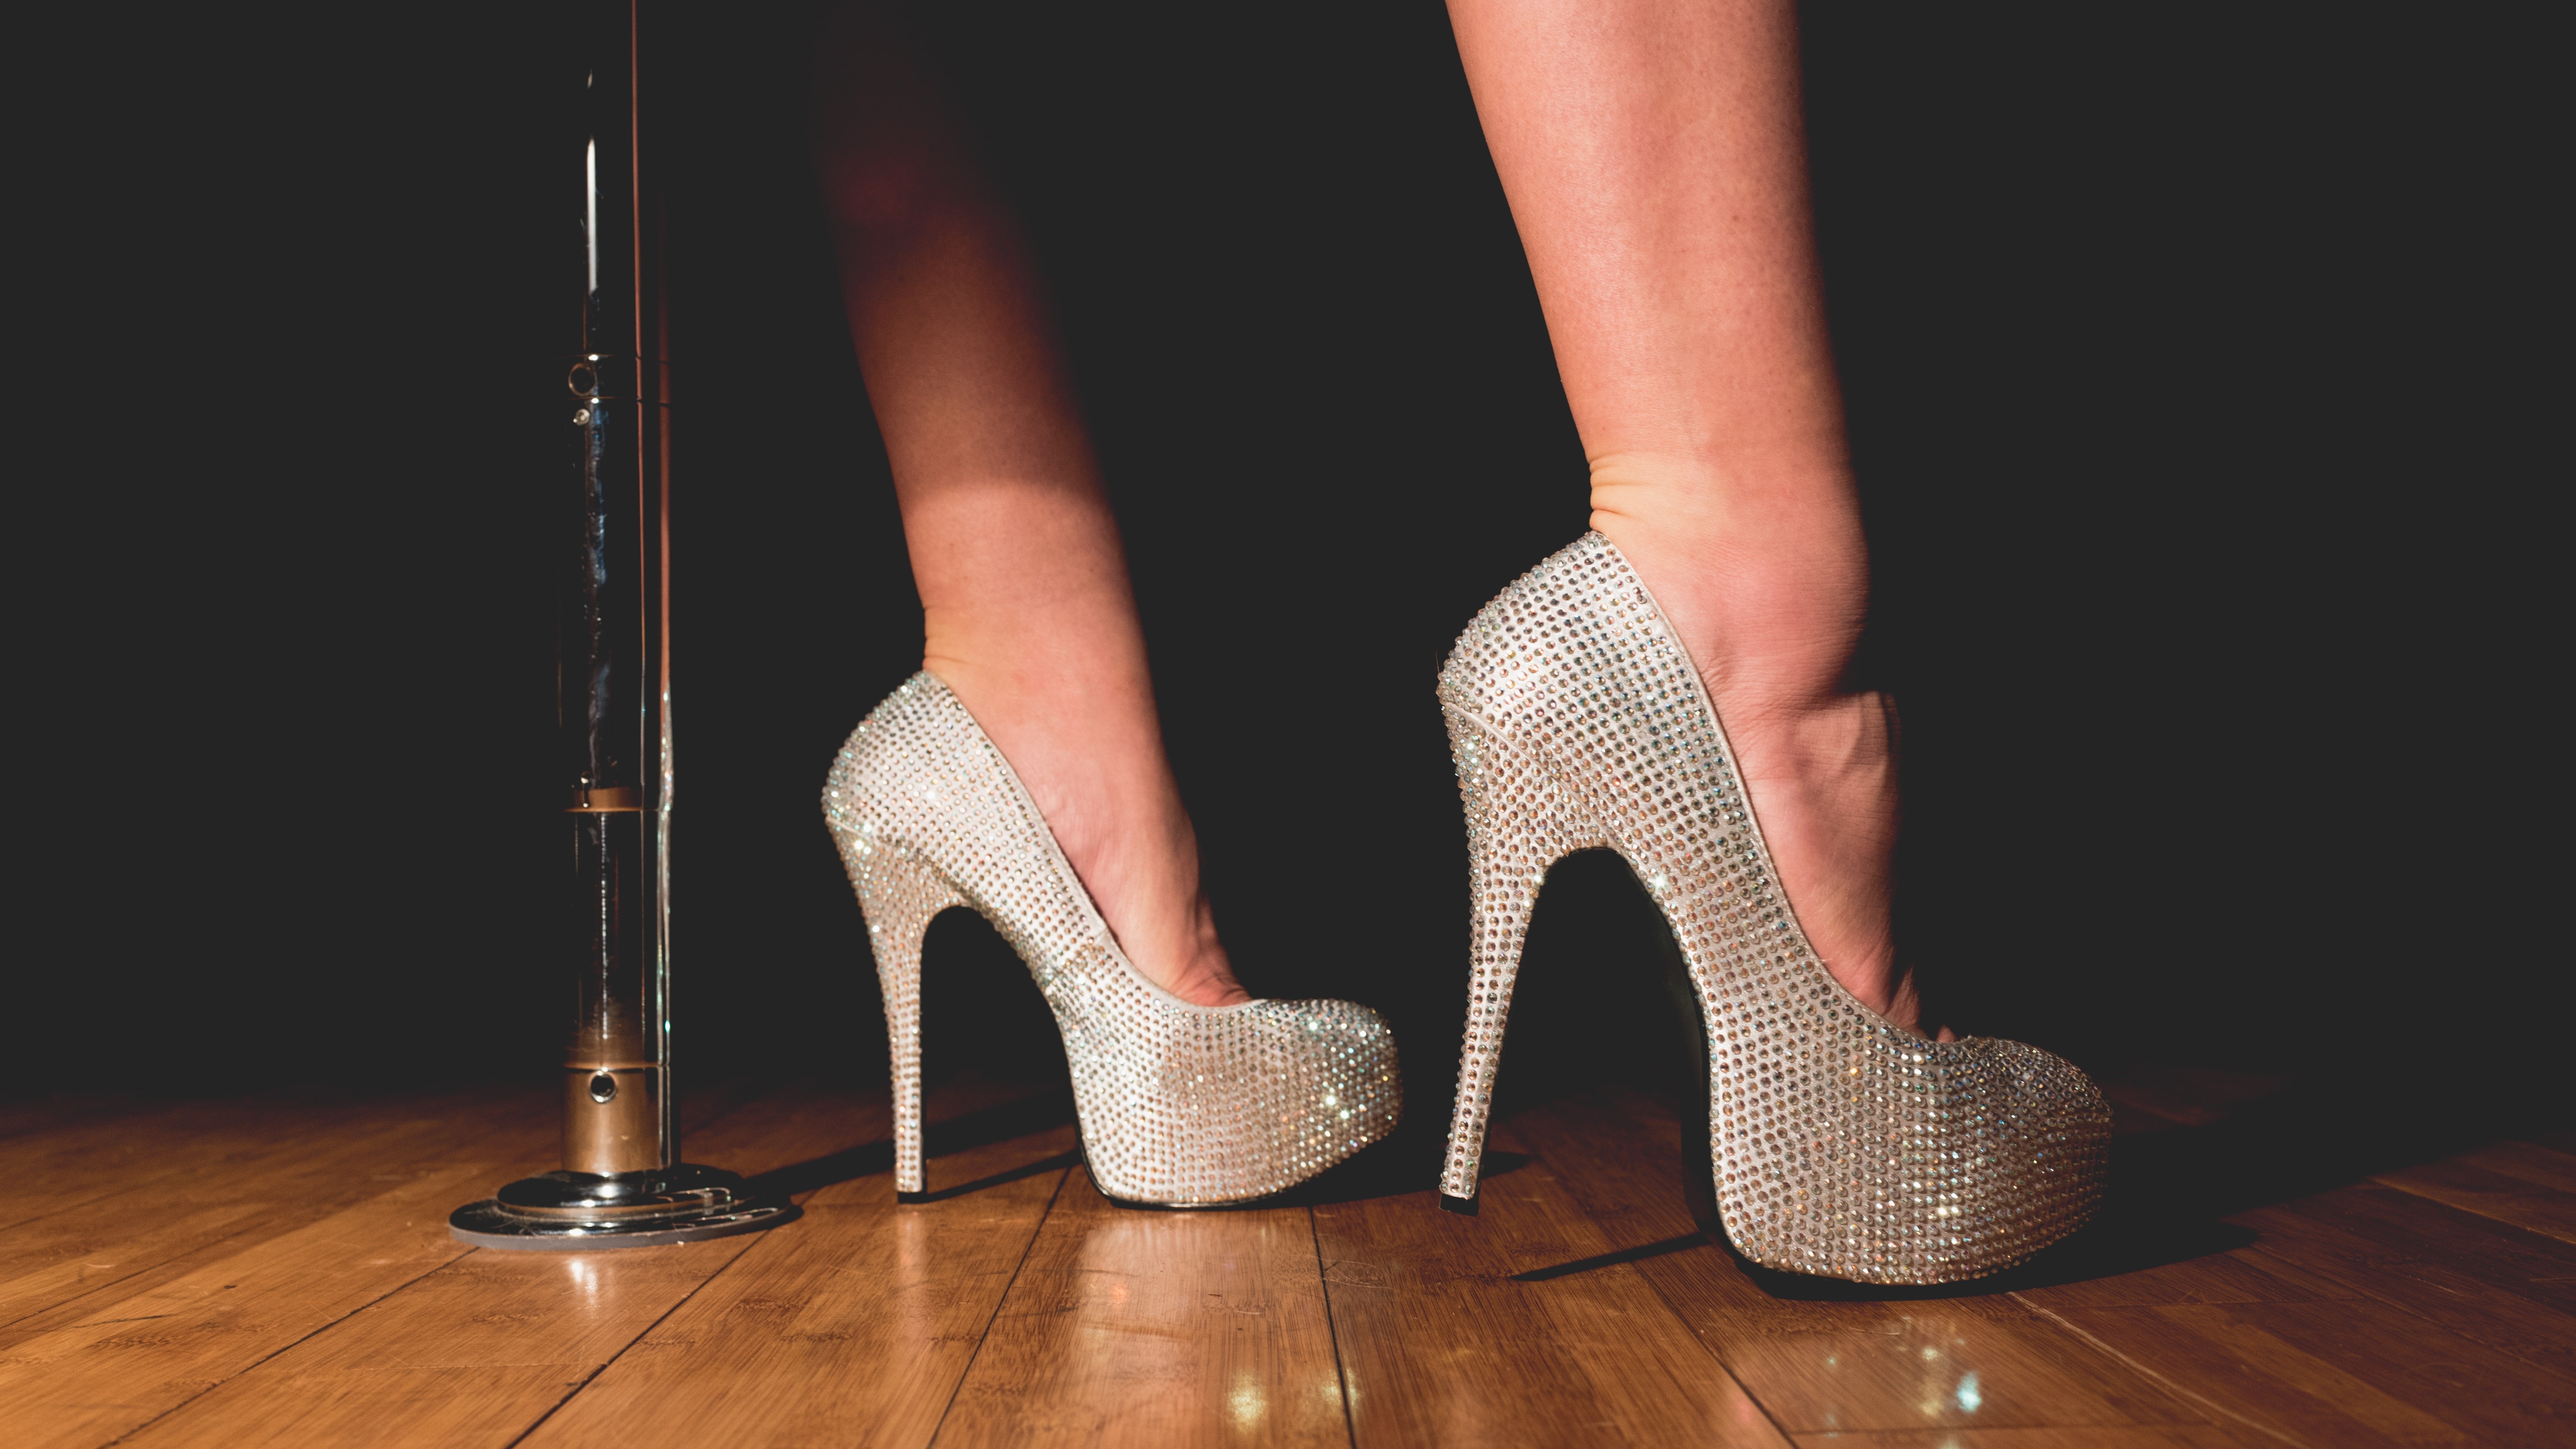 Texas Governor signs new law requiring strip club employees and patrons to be at least 21 | San Antonio | San Antonio Current